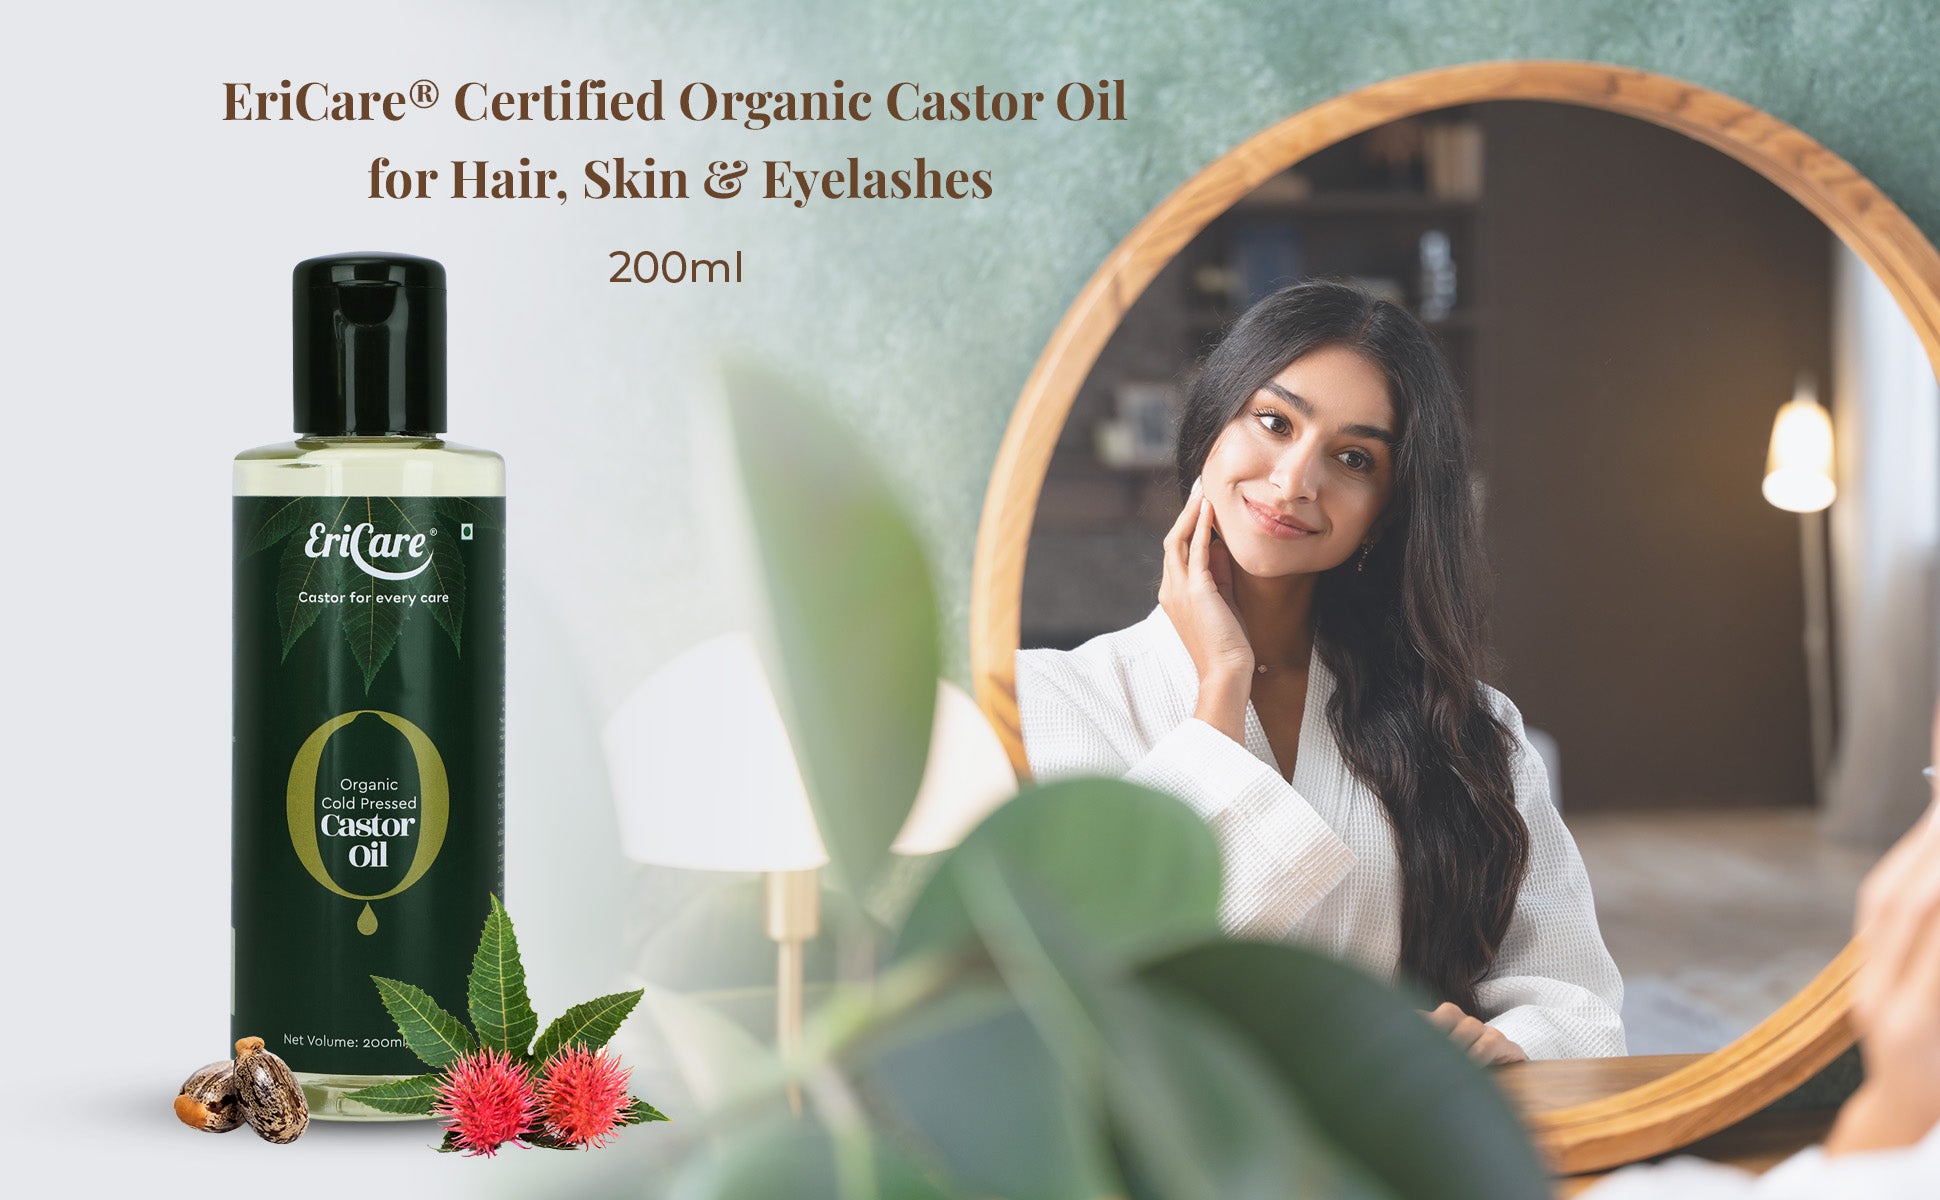 Introducing EriCare Certified Organic Castor Oil where a woman is shown who is amazed by the results of her healthy hair growth and clear skin.